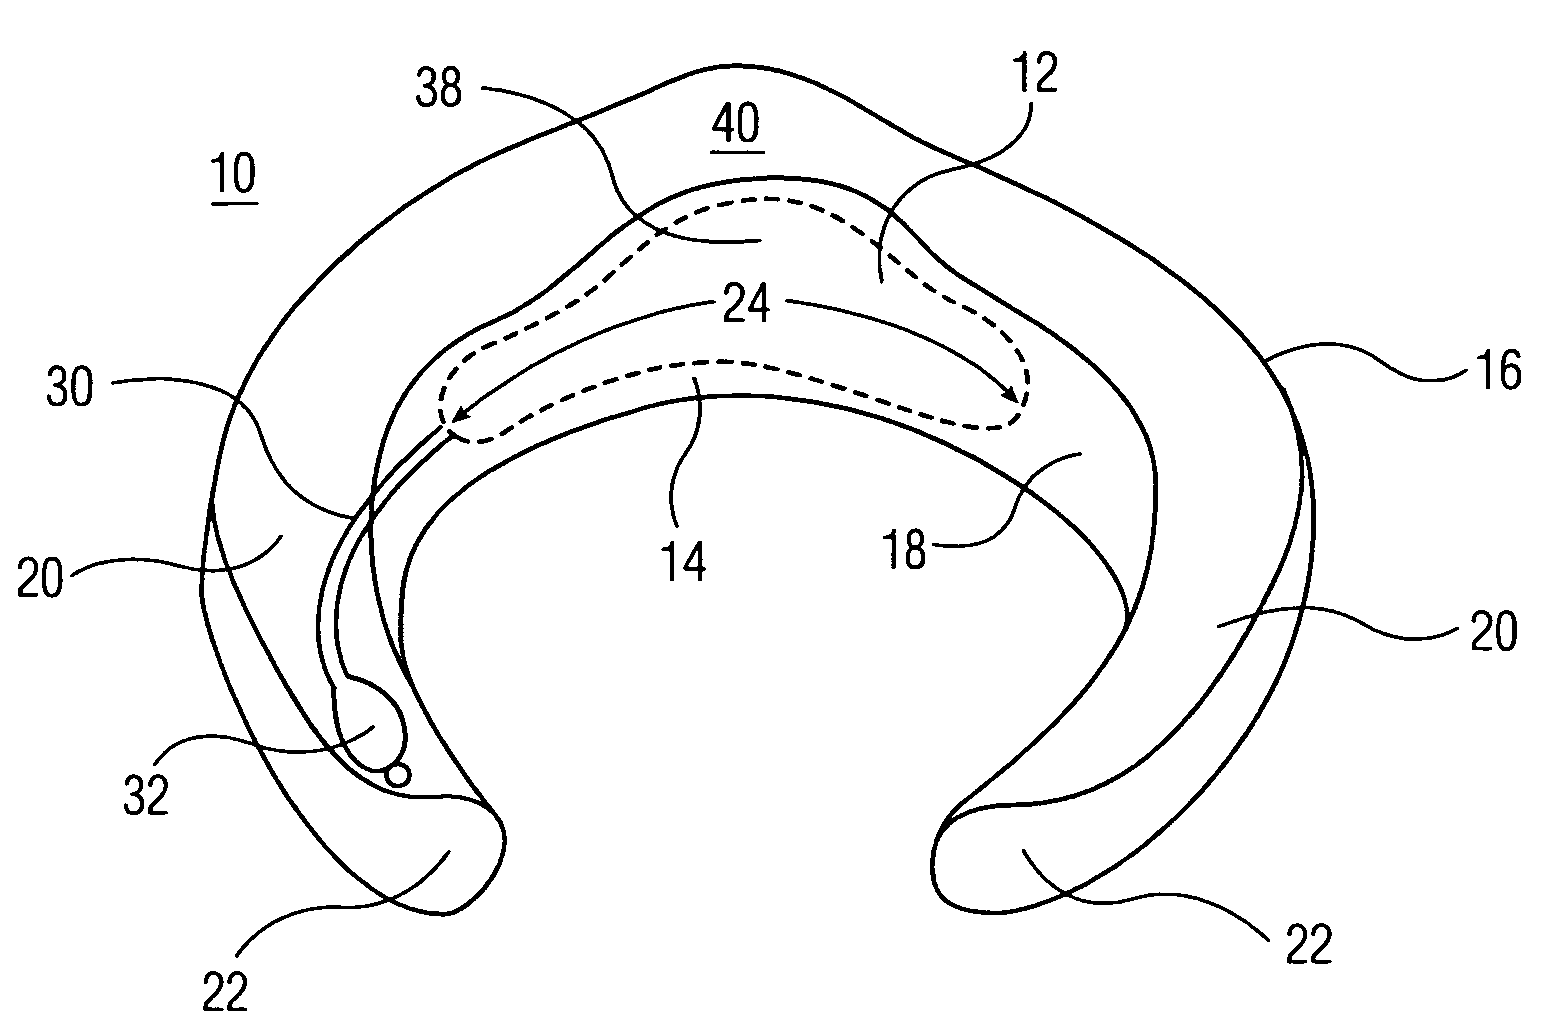 Inflatable cervical cushion